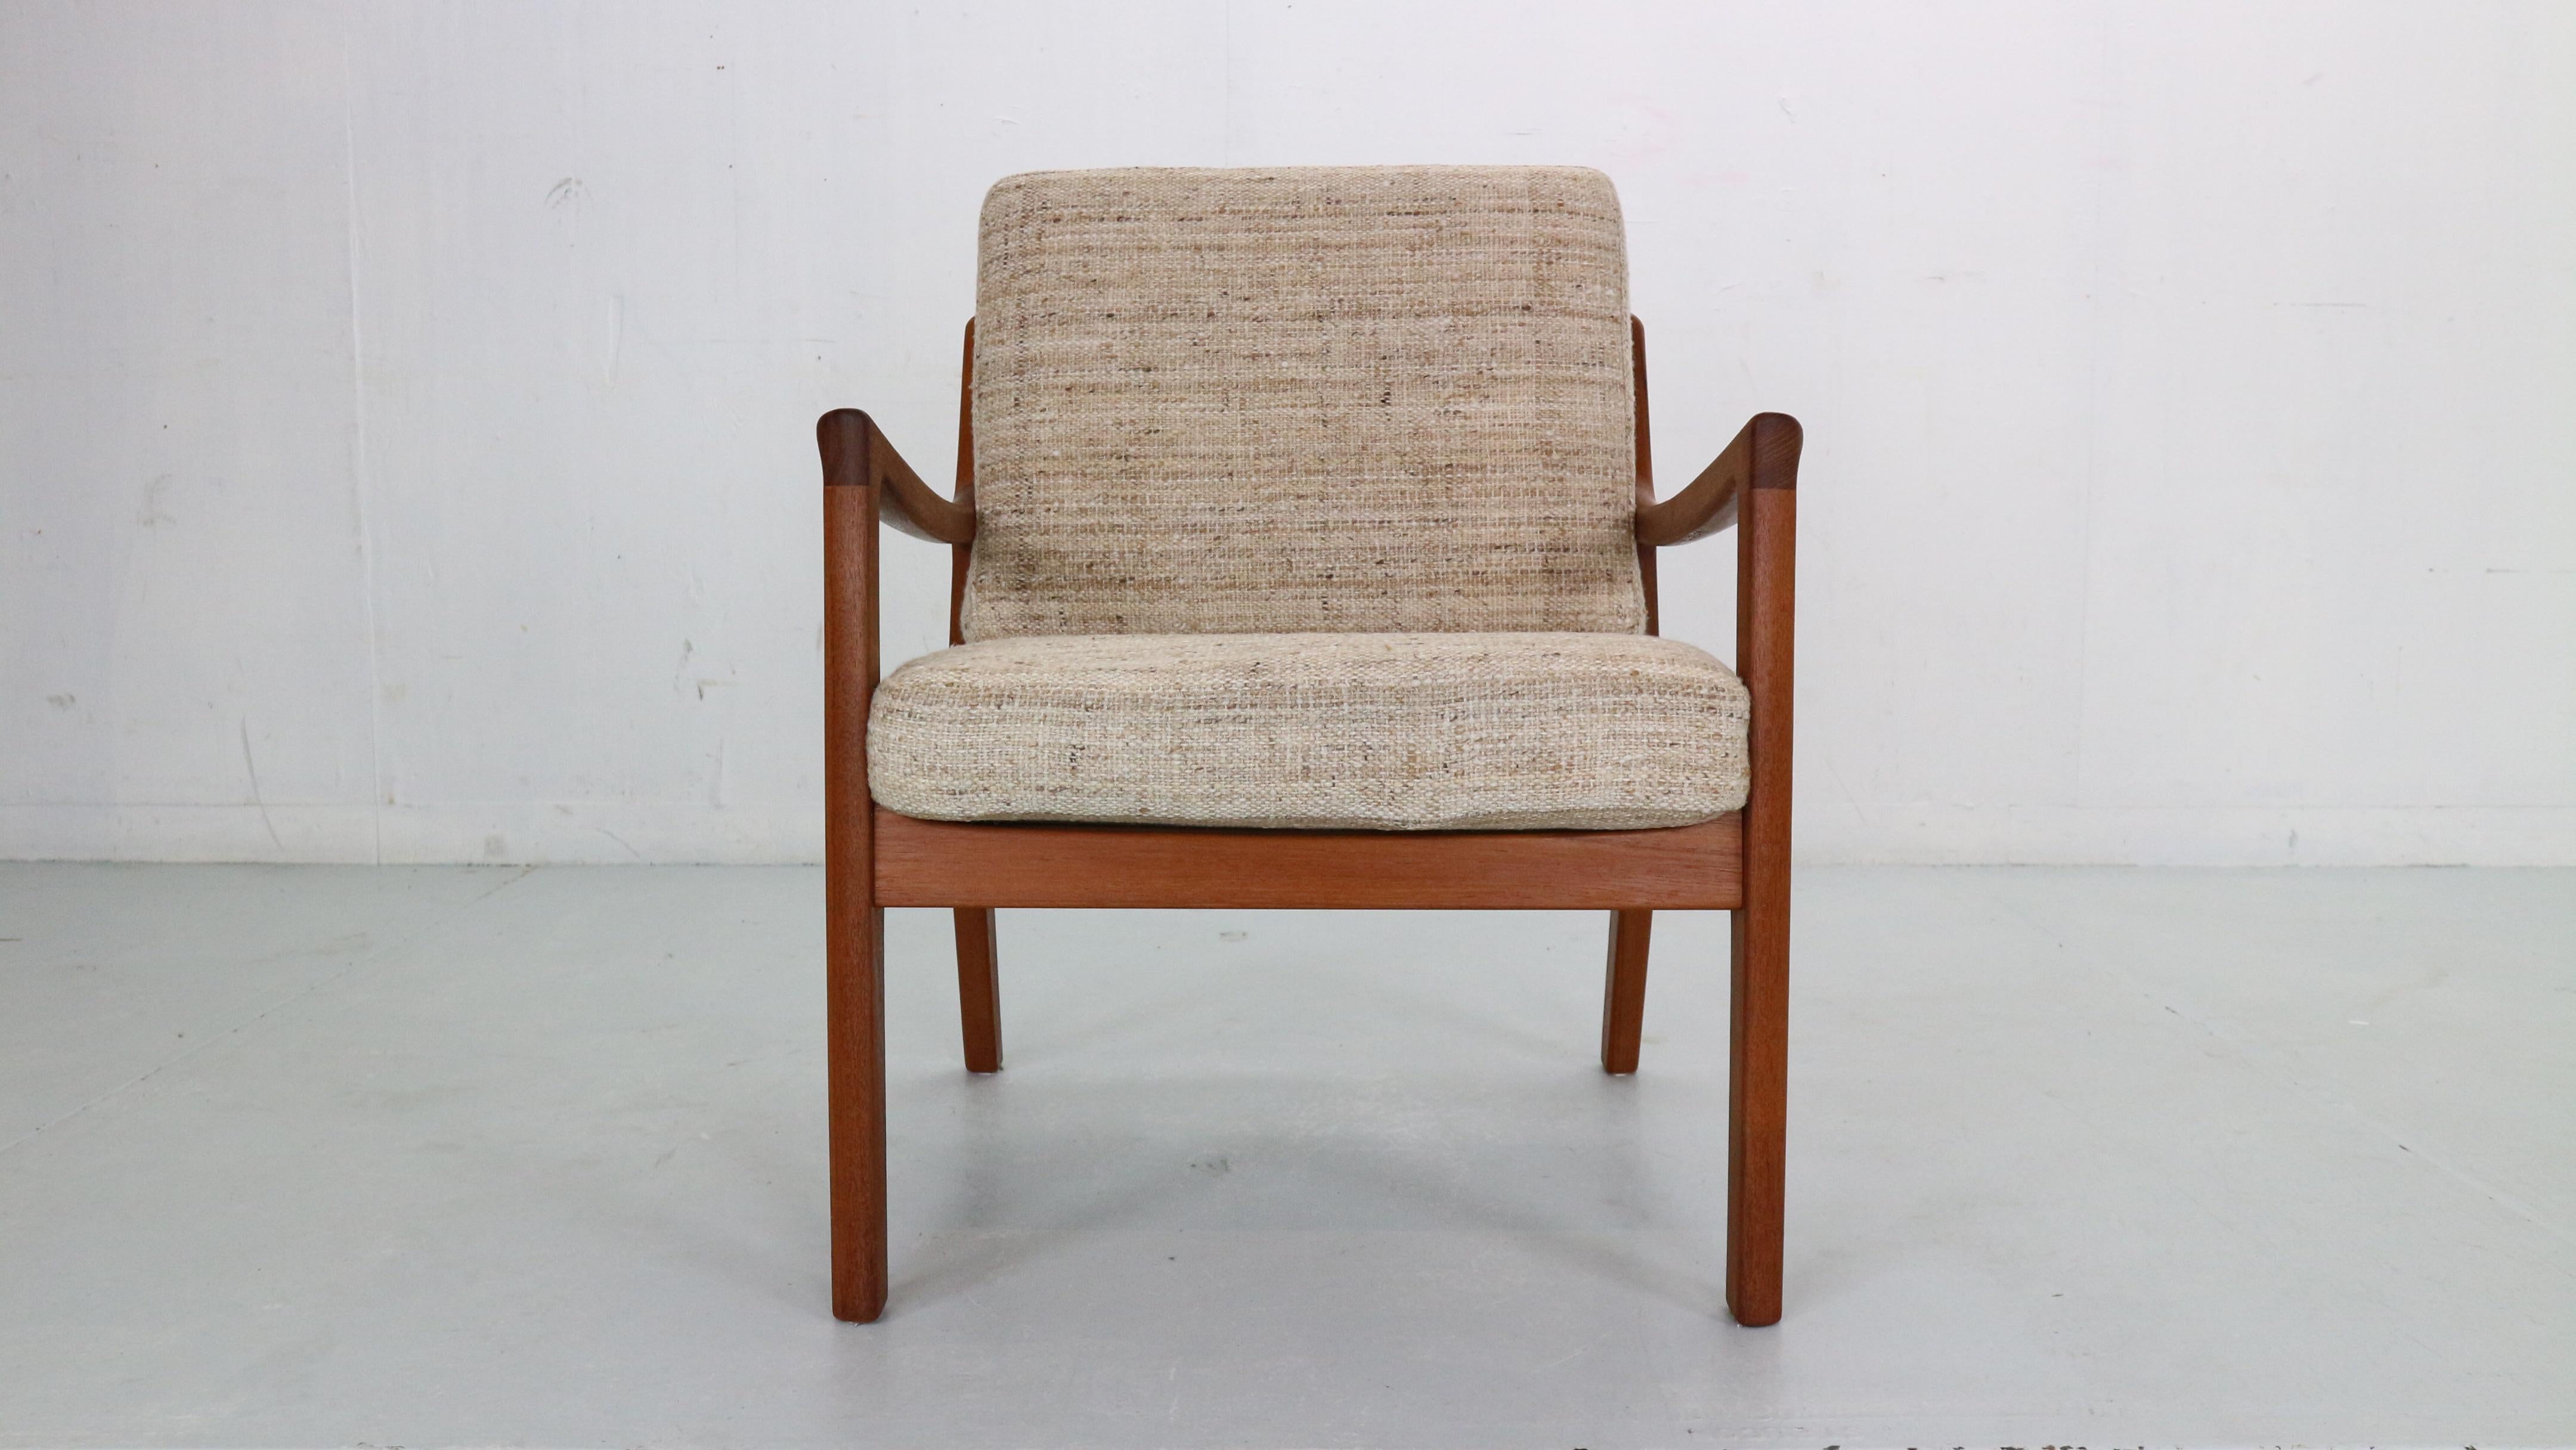 Elegant lounge chair designed by Ole Wanscher for France & Søn in Denmark, 1956.
This vintage model FD-109 lounge chair maintains the manufacturer’s mark and features a sturdy teak wood frame with a slated open back and angled legs for an organic